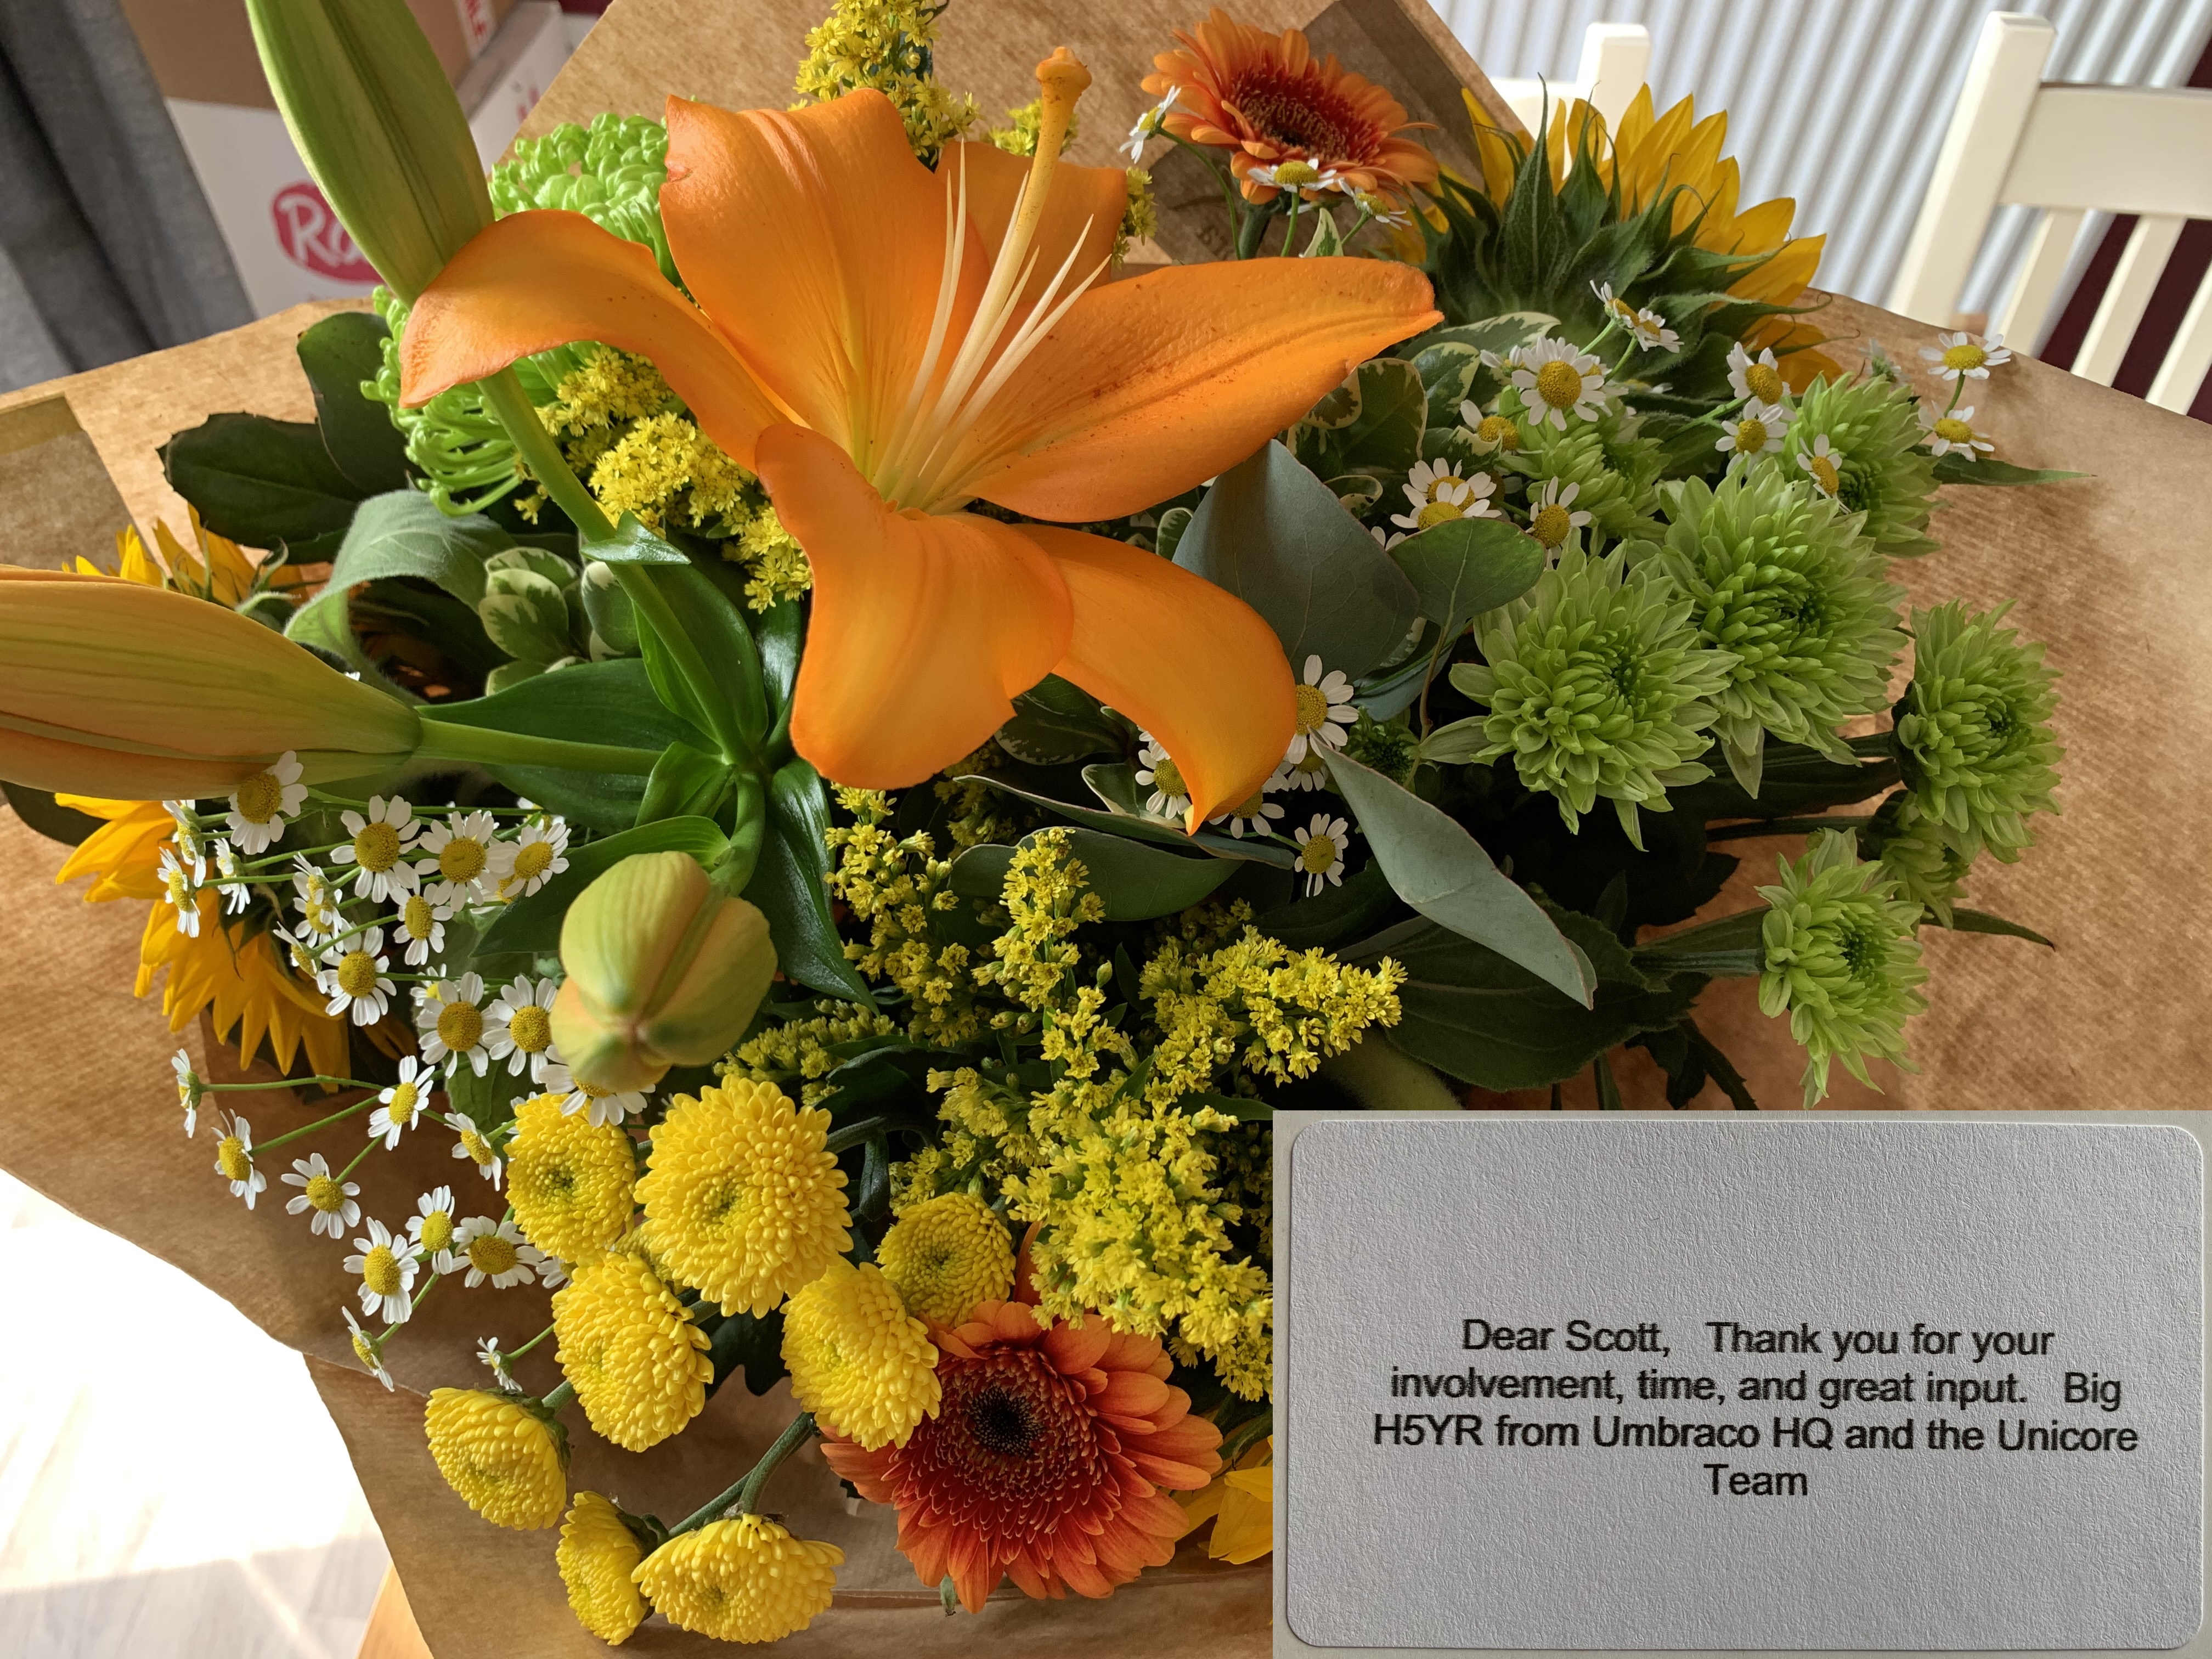 Flowers from the Unicore team